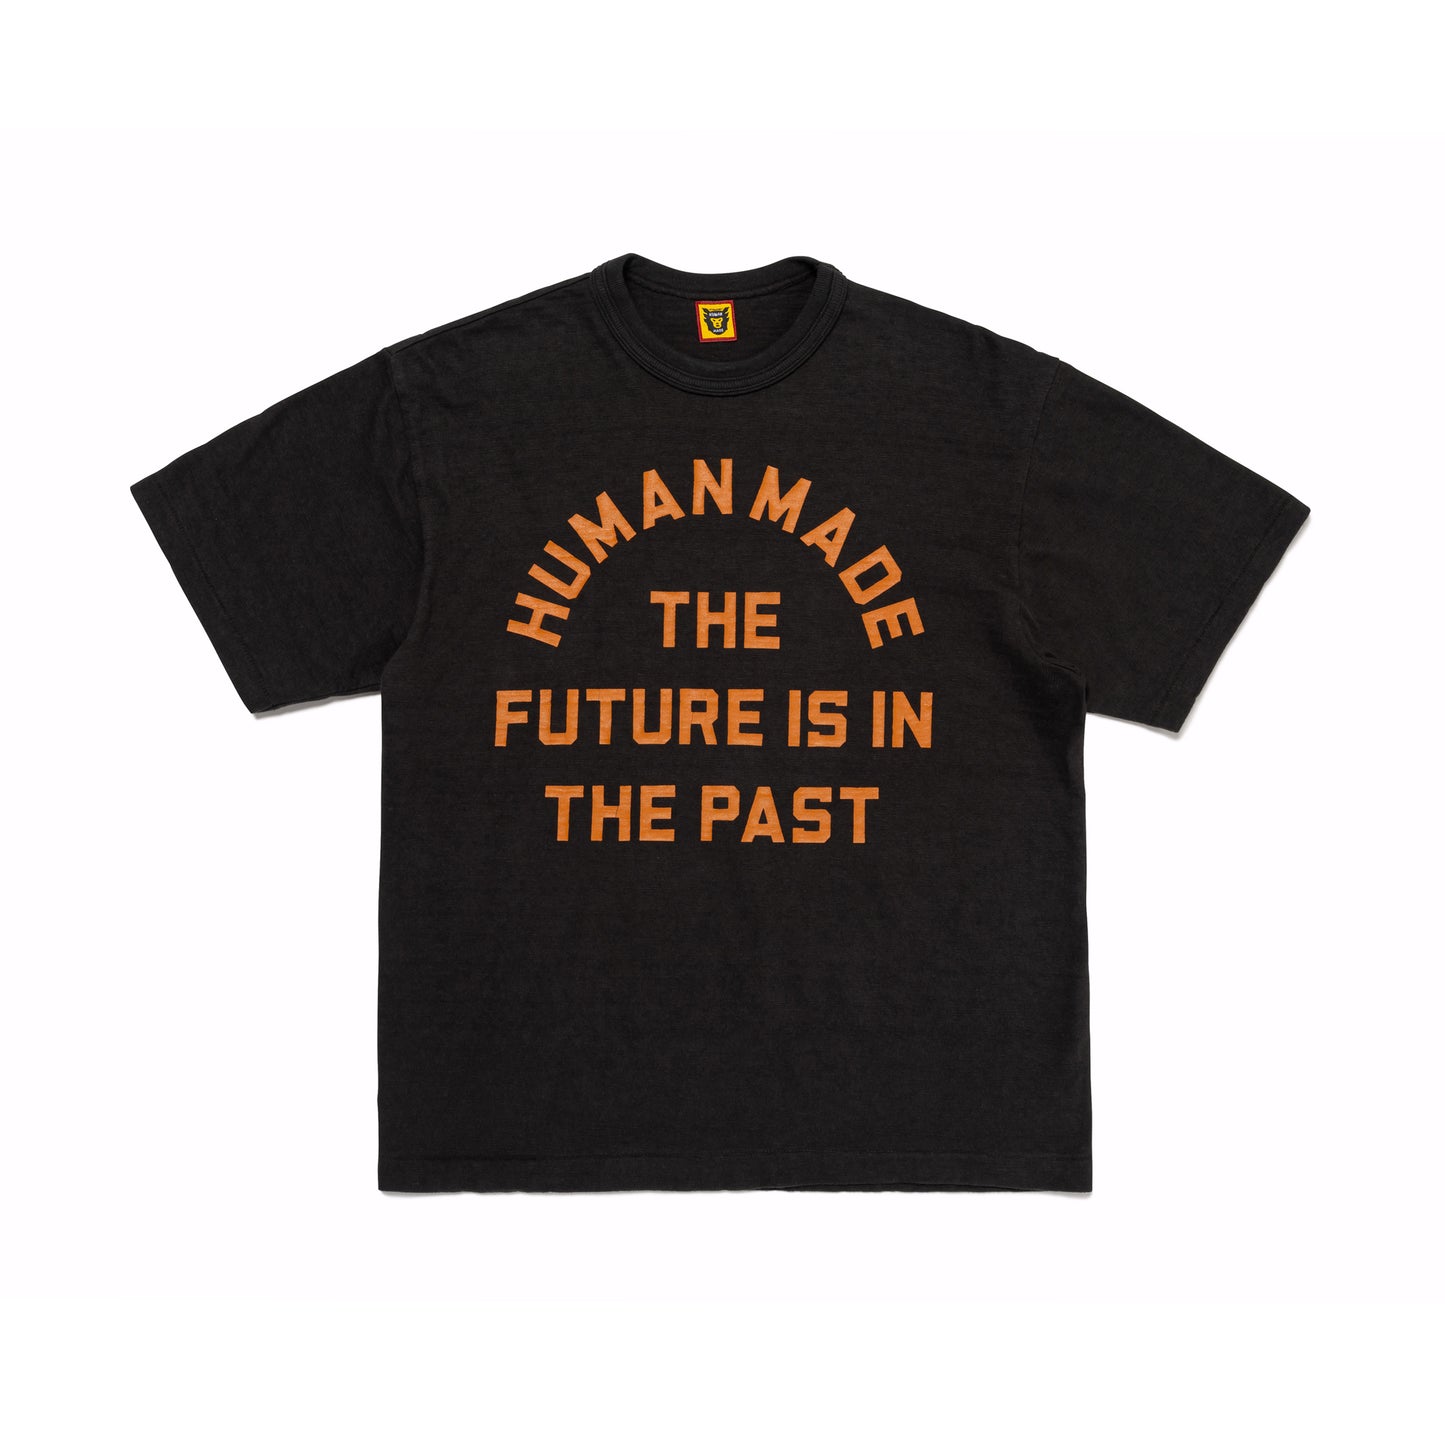 GRAPHIC T-SHIRT #10 – HUMAN MADE ONLINE STORE